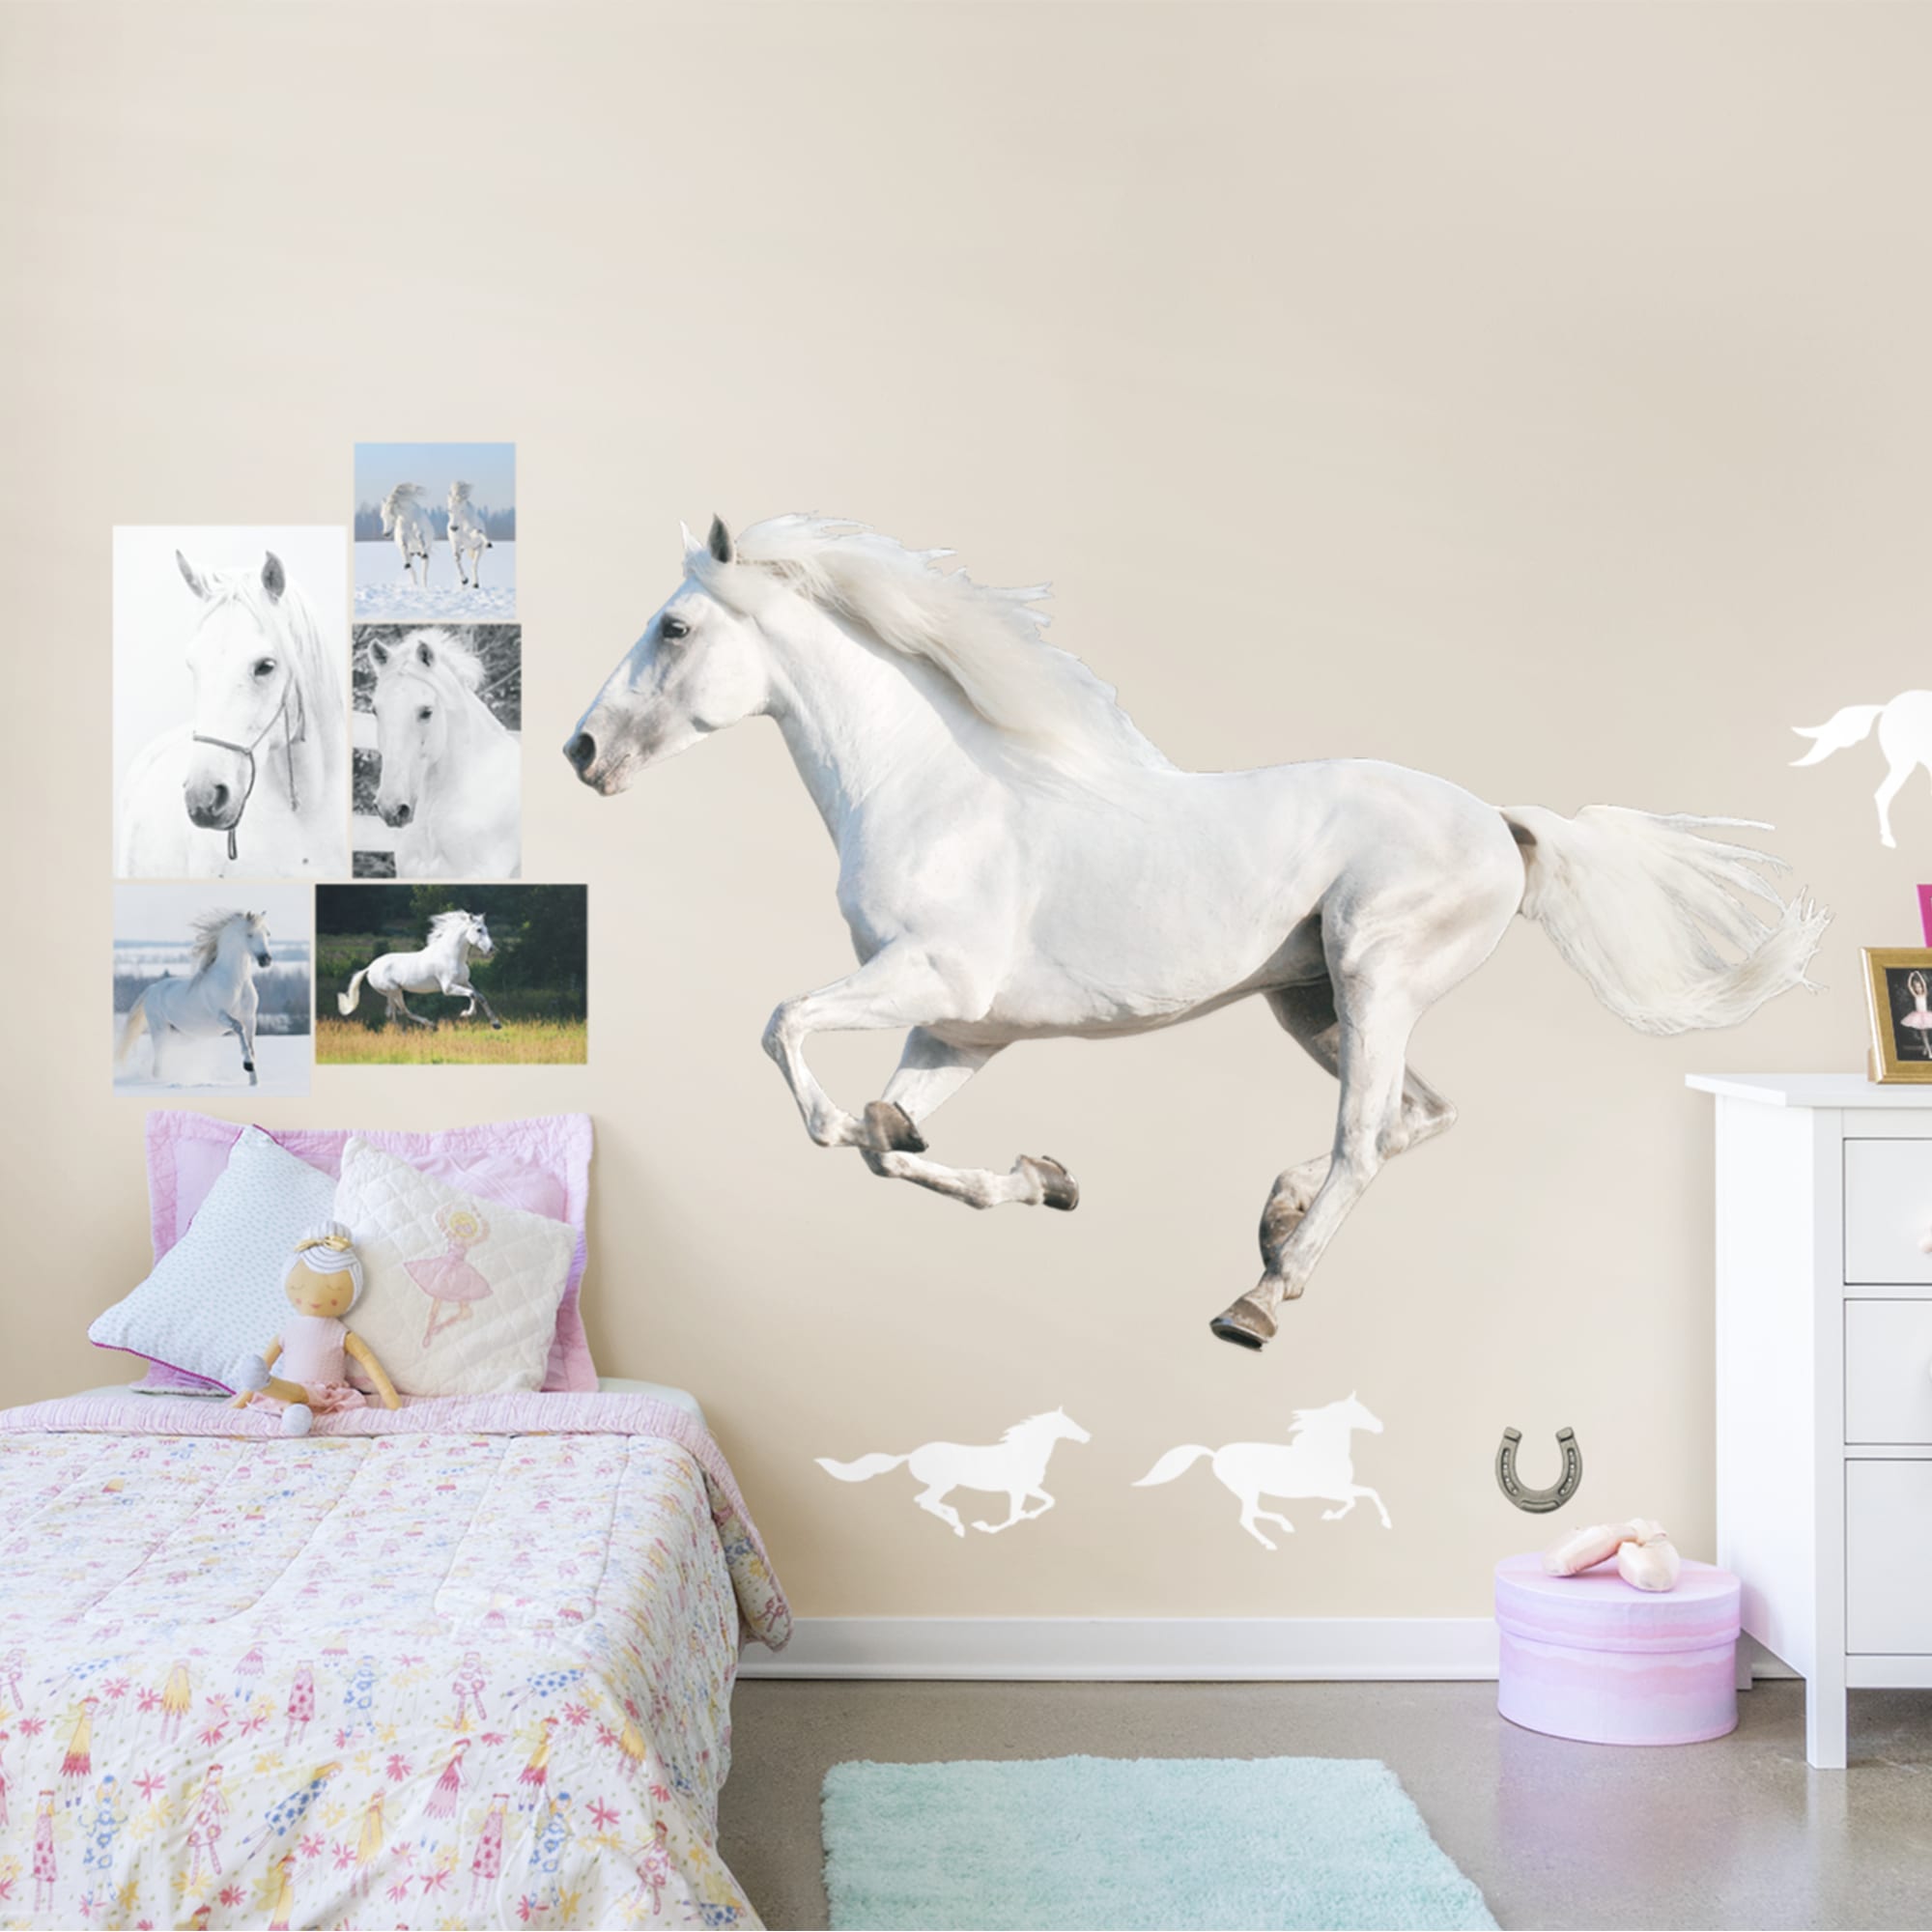 White Horse Running - Removable Vinyl Decal Huge Animal + 12 Decals (81"W x 54"H) by Fathead